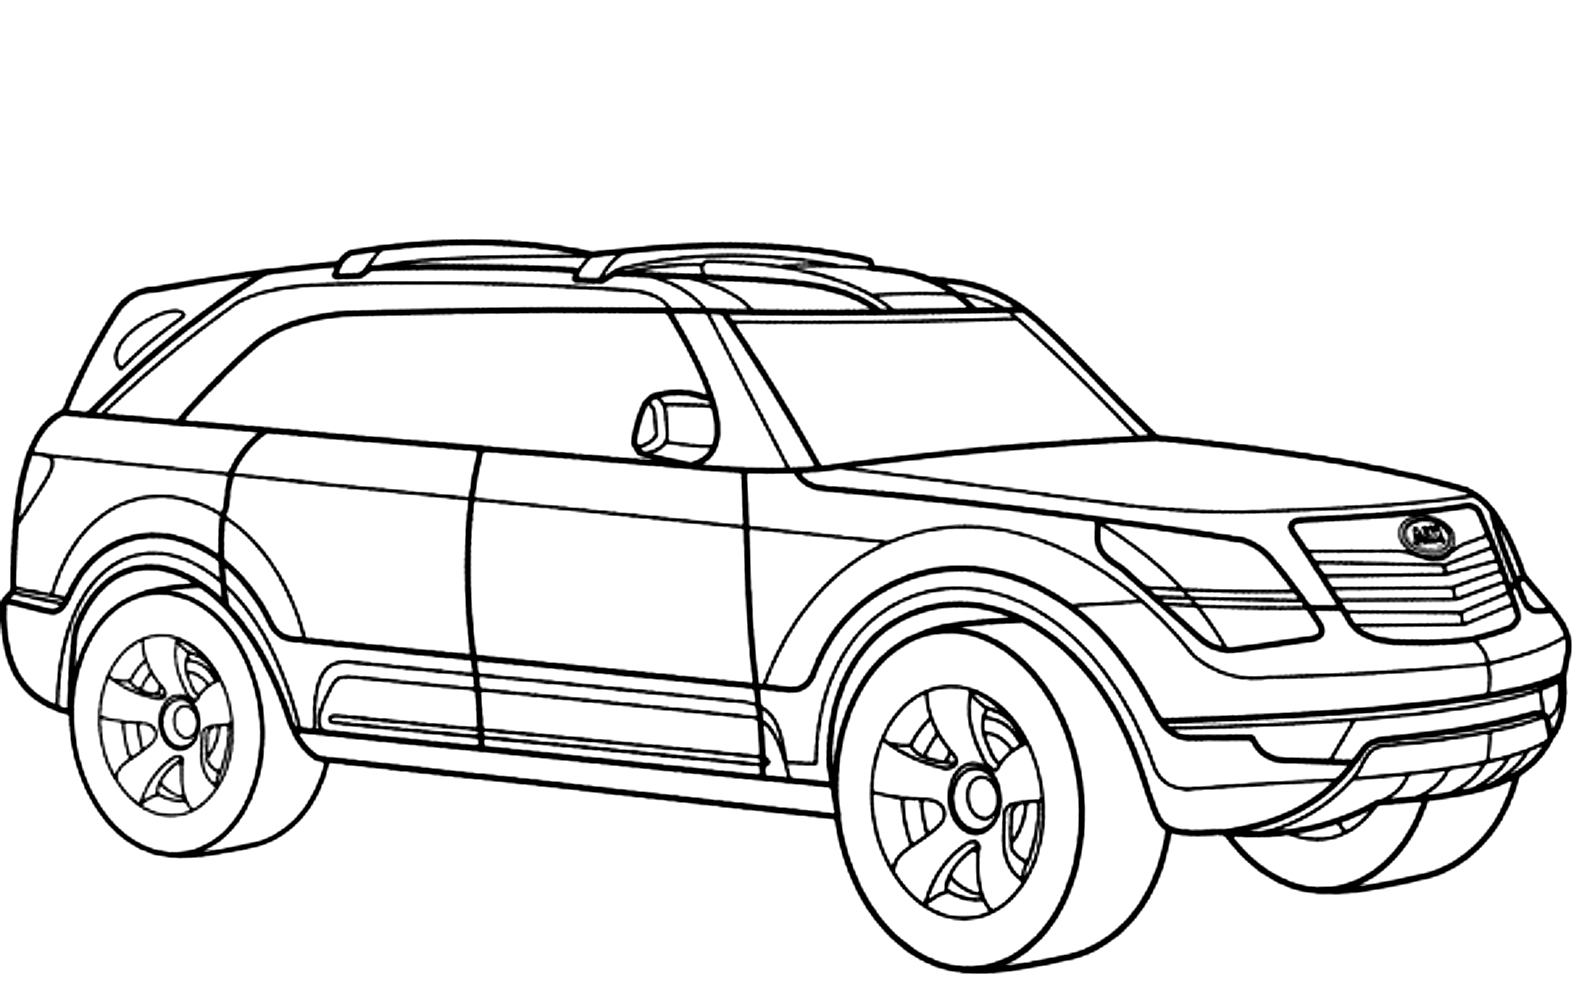 Drawing 22 from Automobiles coloring page to print and coloring